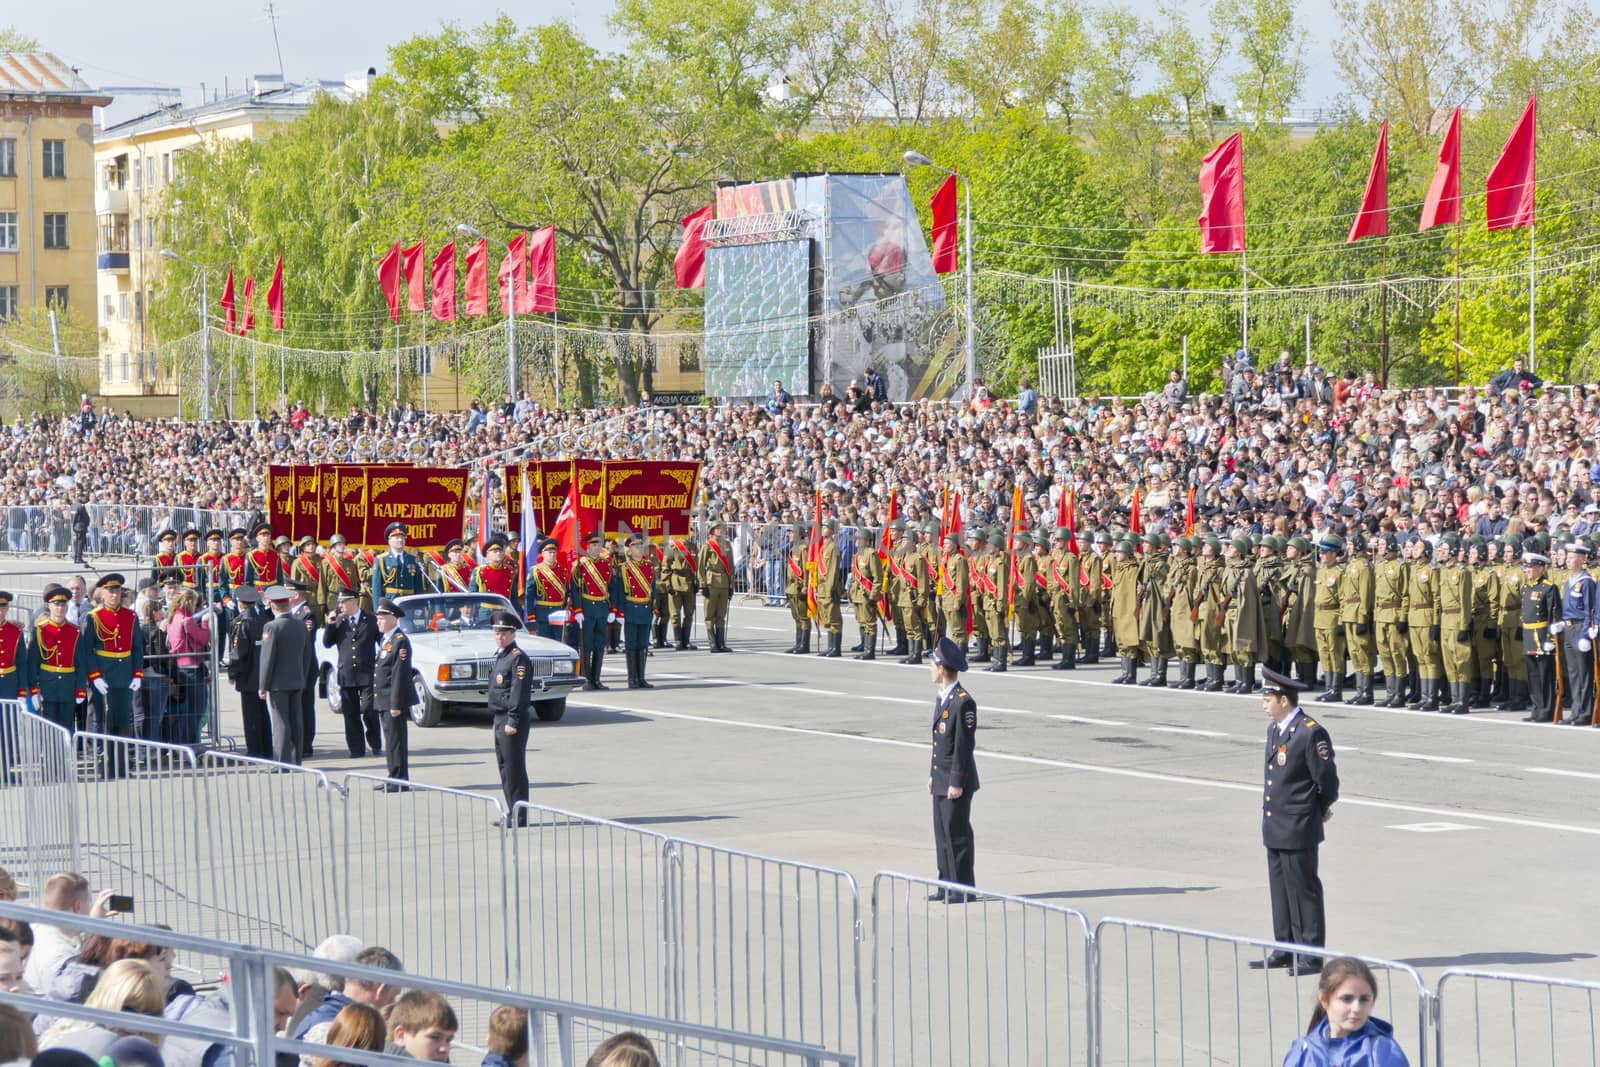 Samara, Russia - May 9: Russian ceremony of the opening military parade on annual Victory Day, May, 9, 2015 in Samara, Russia.
